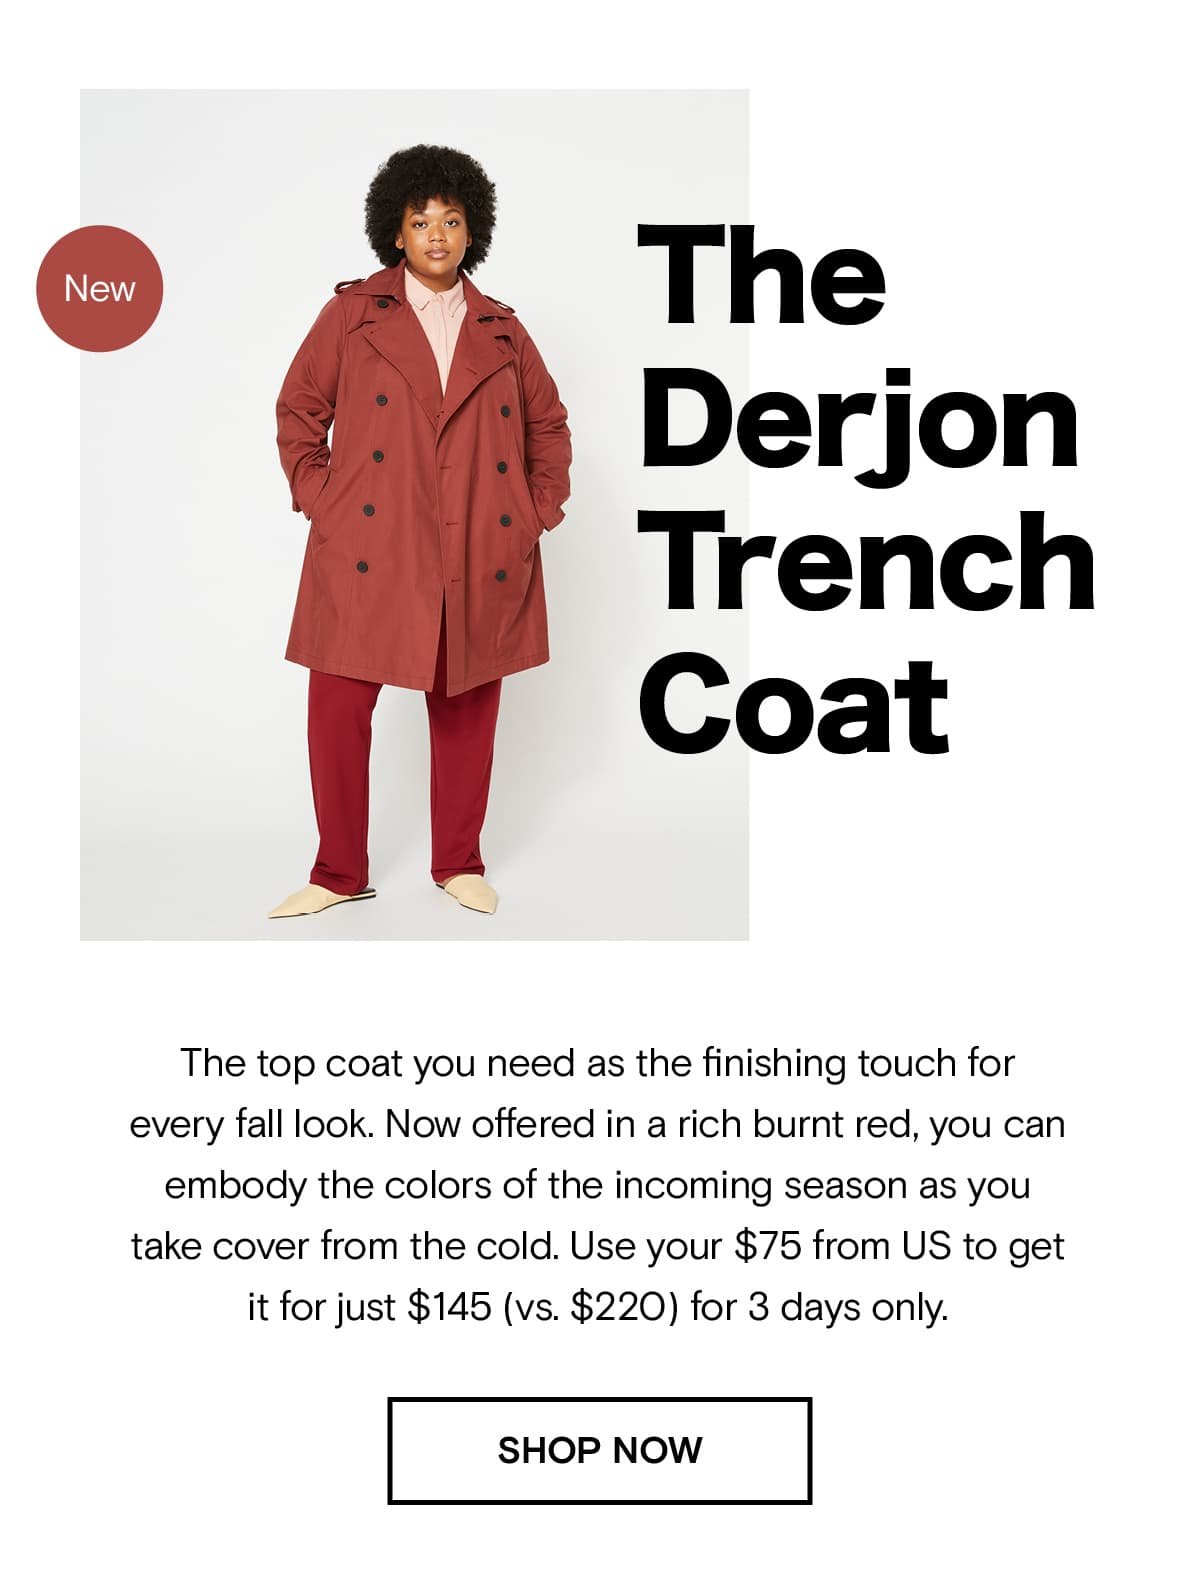 The top coat you need as the finishing touch for every fall look. Now offered in a rich burnt red, you can embody the colors of the incoming season as you take cover from the cold. Use your $75 from US to get it for just $145 (vs. $220) for 3 days only.